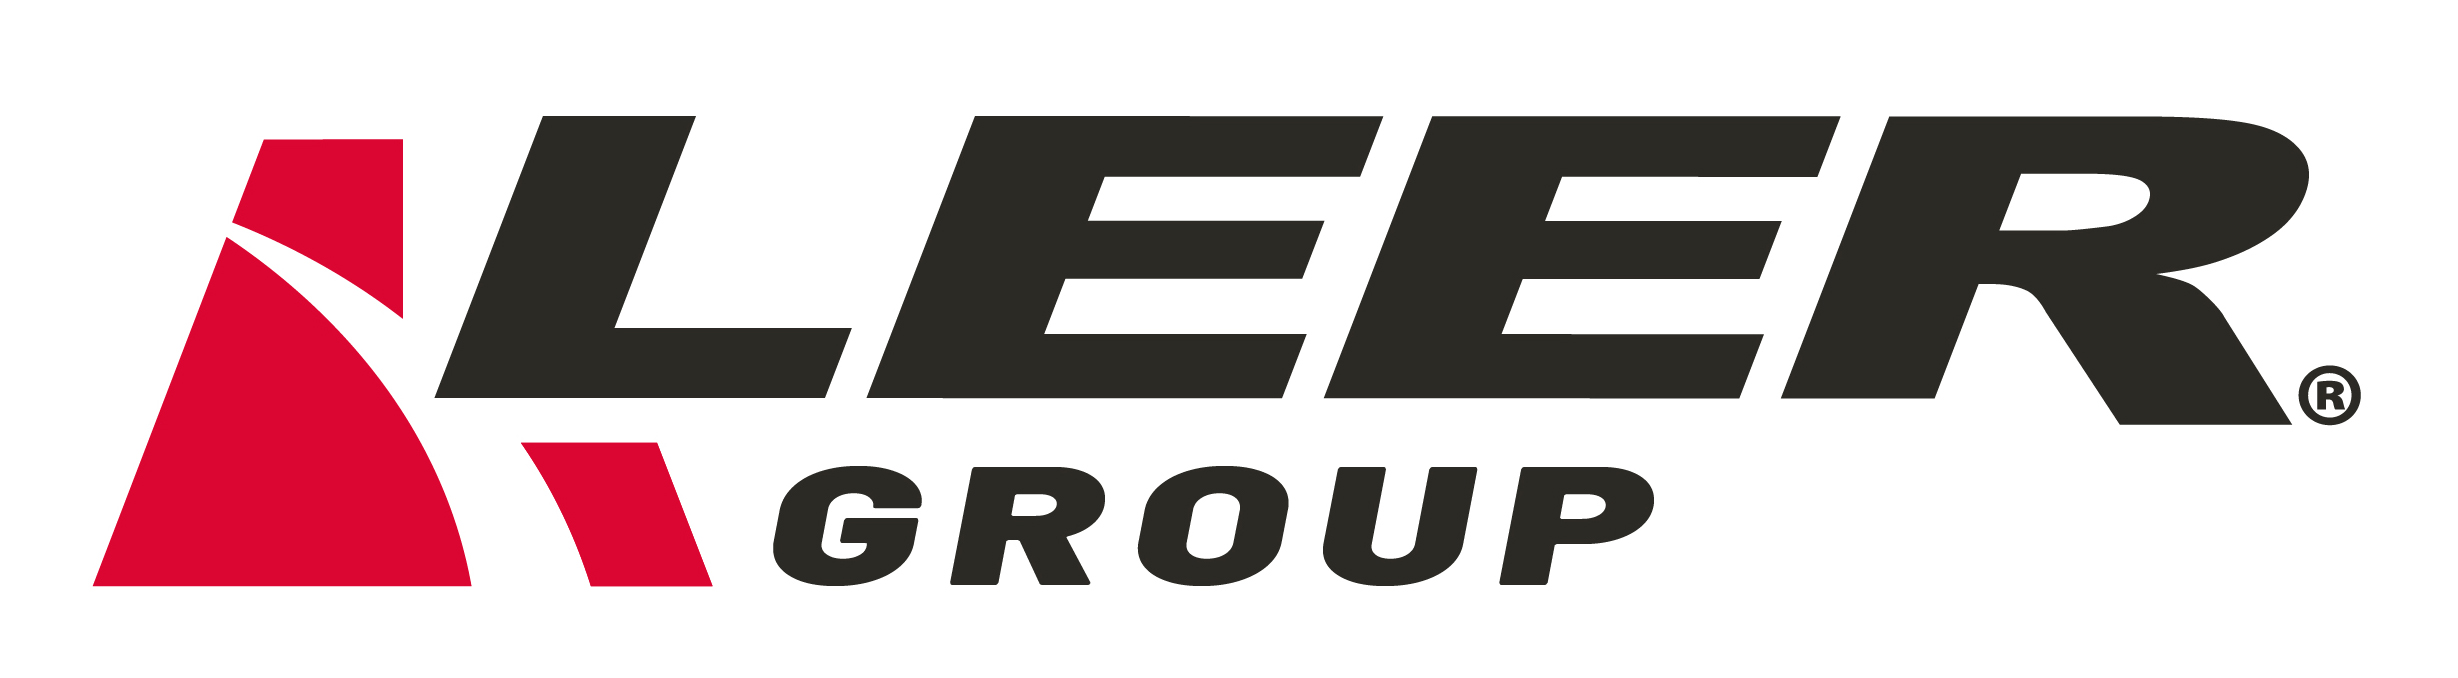 Truck Accessories Group Changes Name to LEER Group | THE SHOP